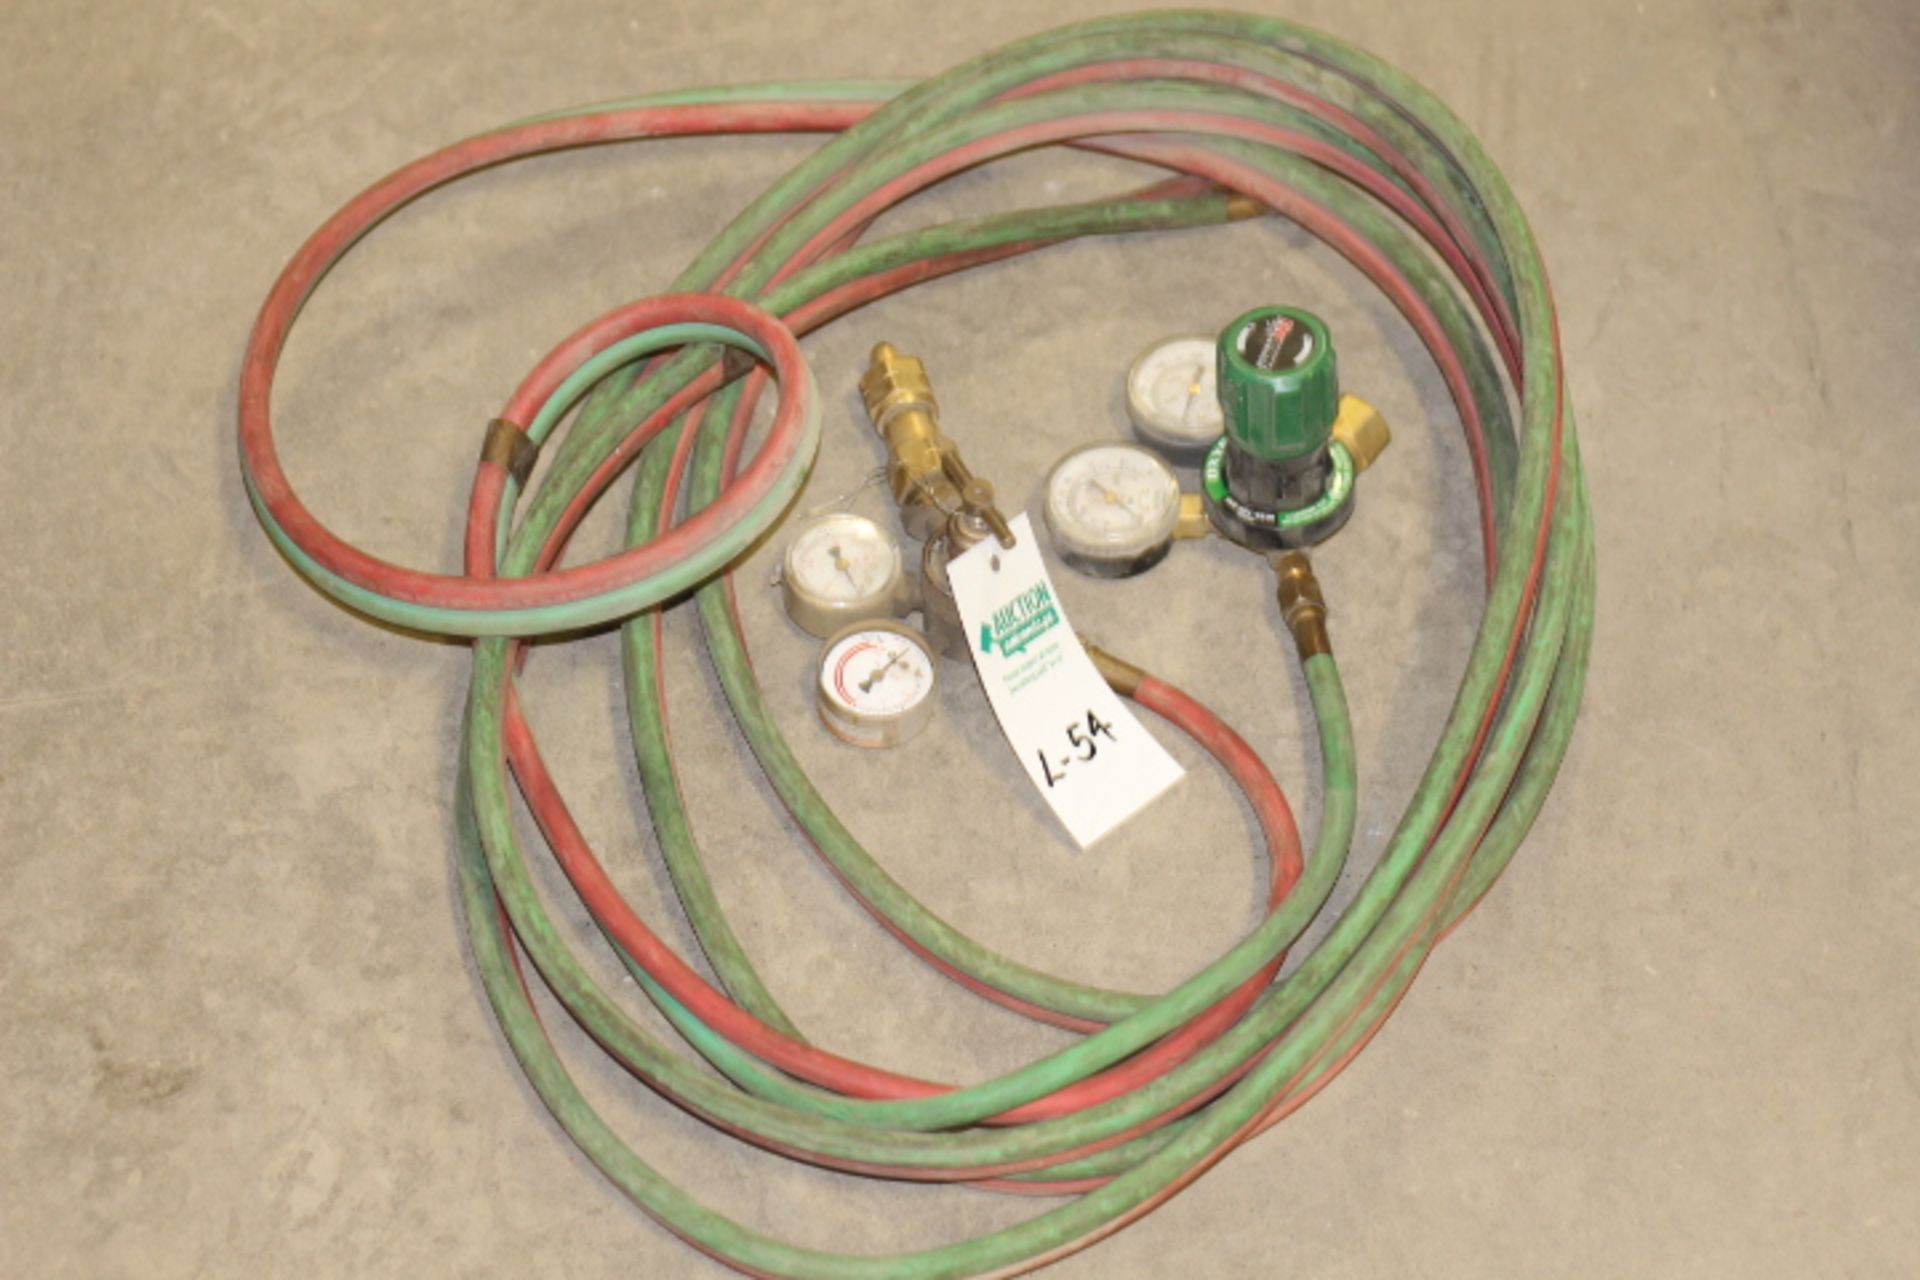 Oxygen and Acetylene Hoses with Gauges